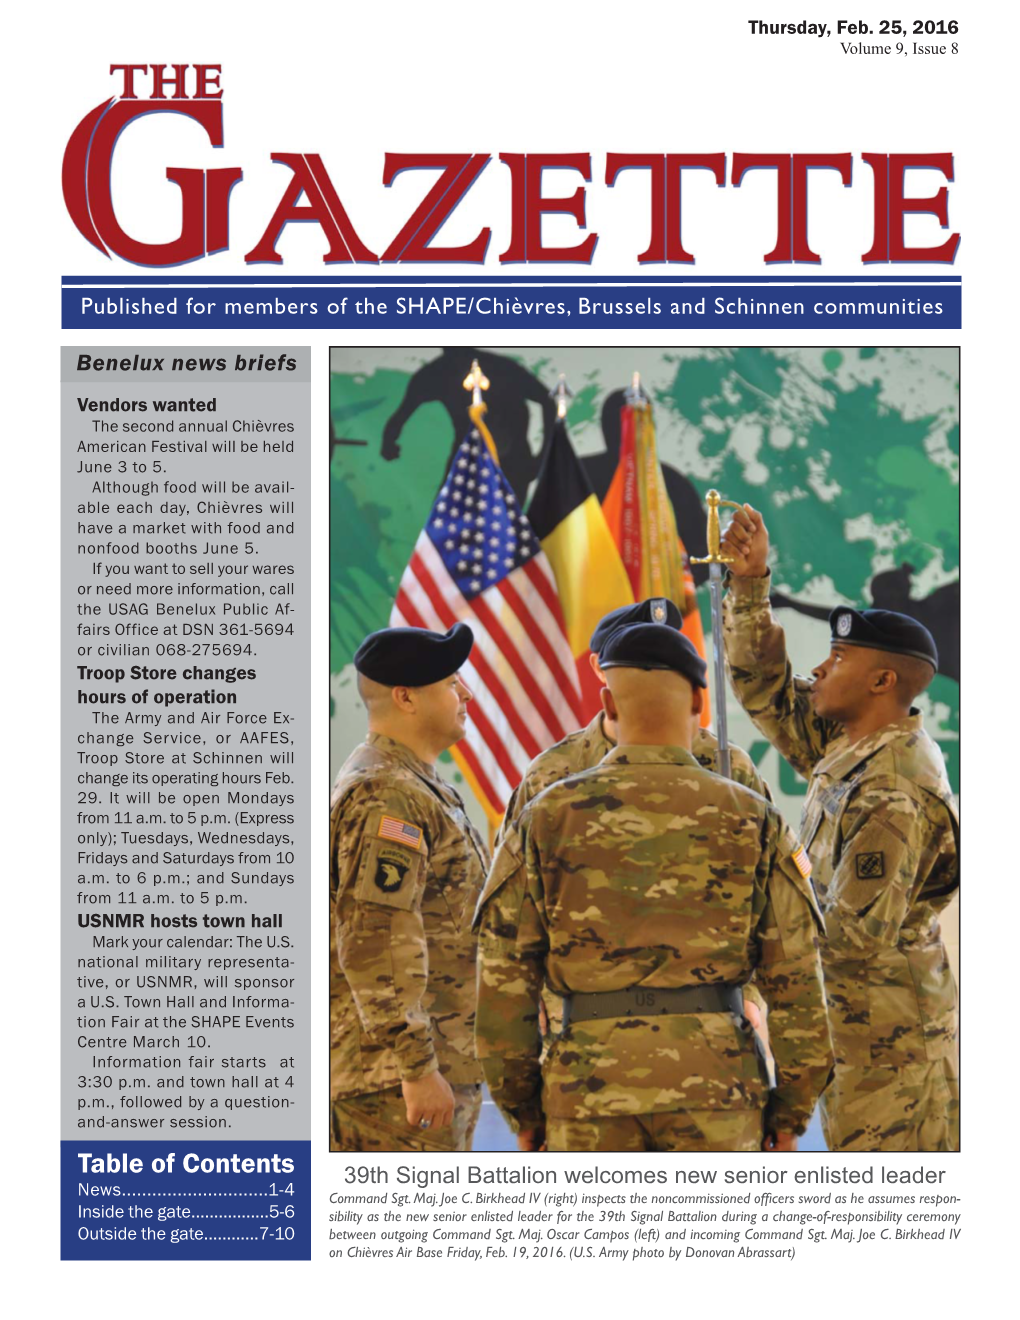 Table of Contents 39Th Signal Battalion Welcomes New Senior Enlisted Leader News